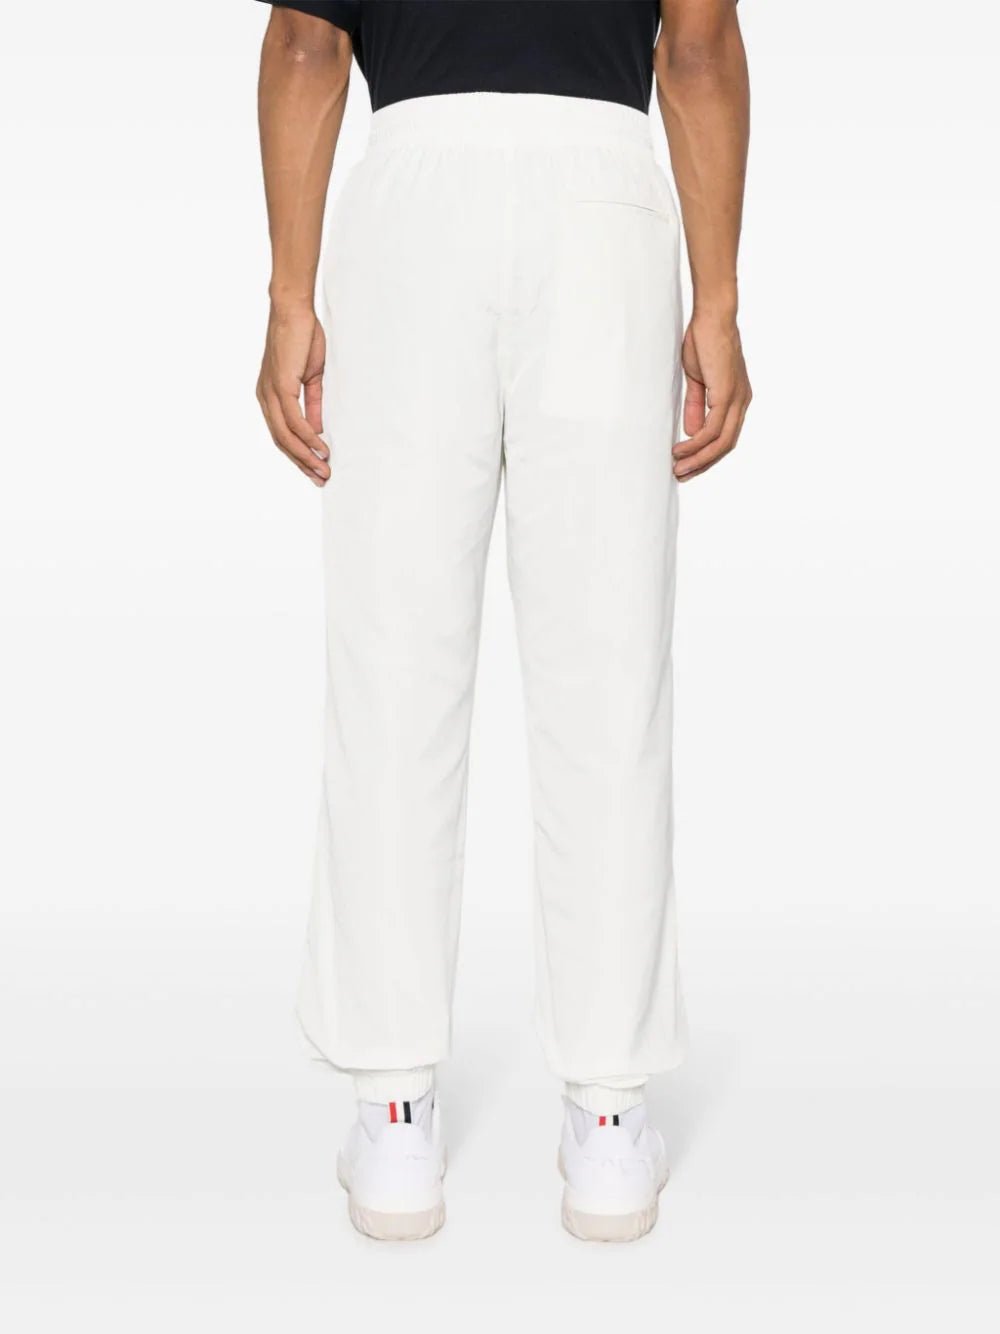 CasablancaLogo-Patch Track Pants at Fashion Clinic